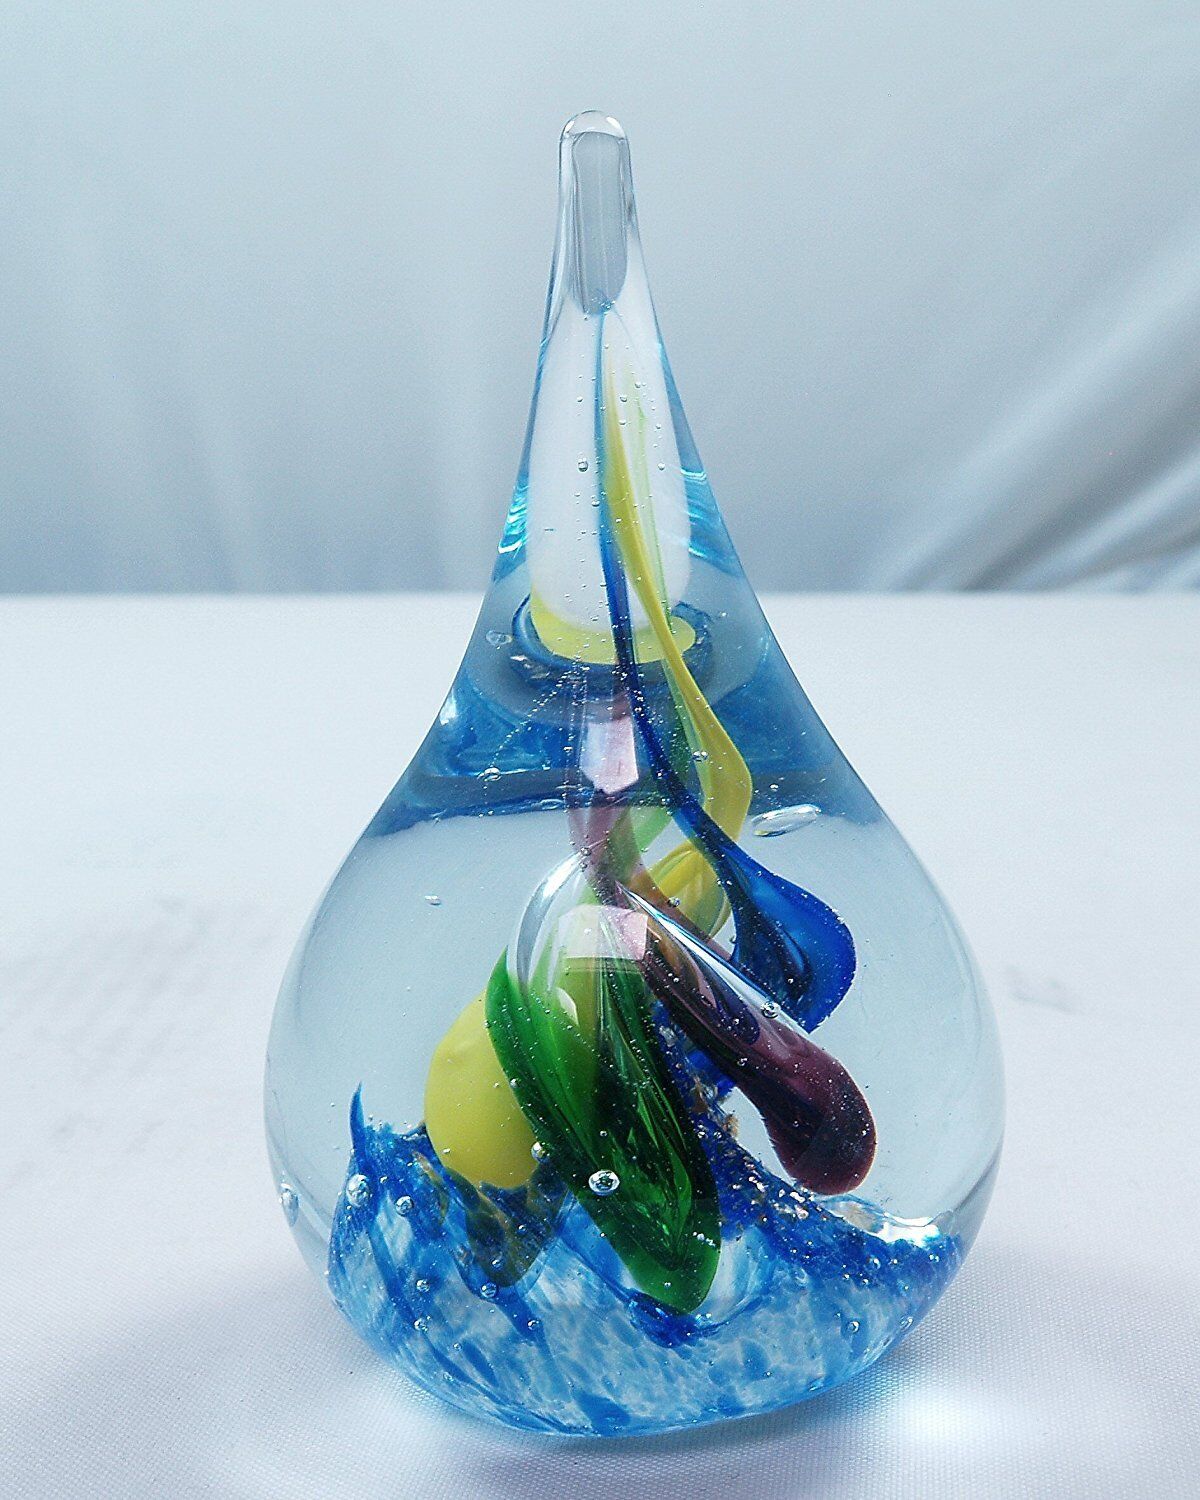 M Design Art Handcraft Glass Gold-plated in the Water Teardrop Paperweight